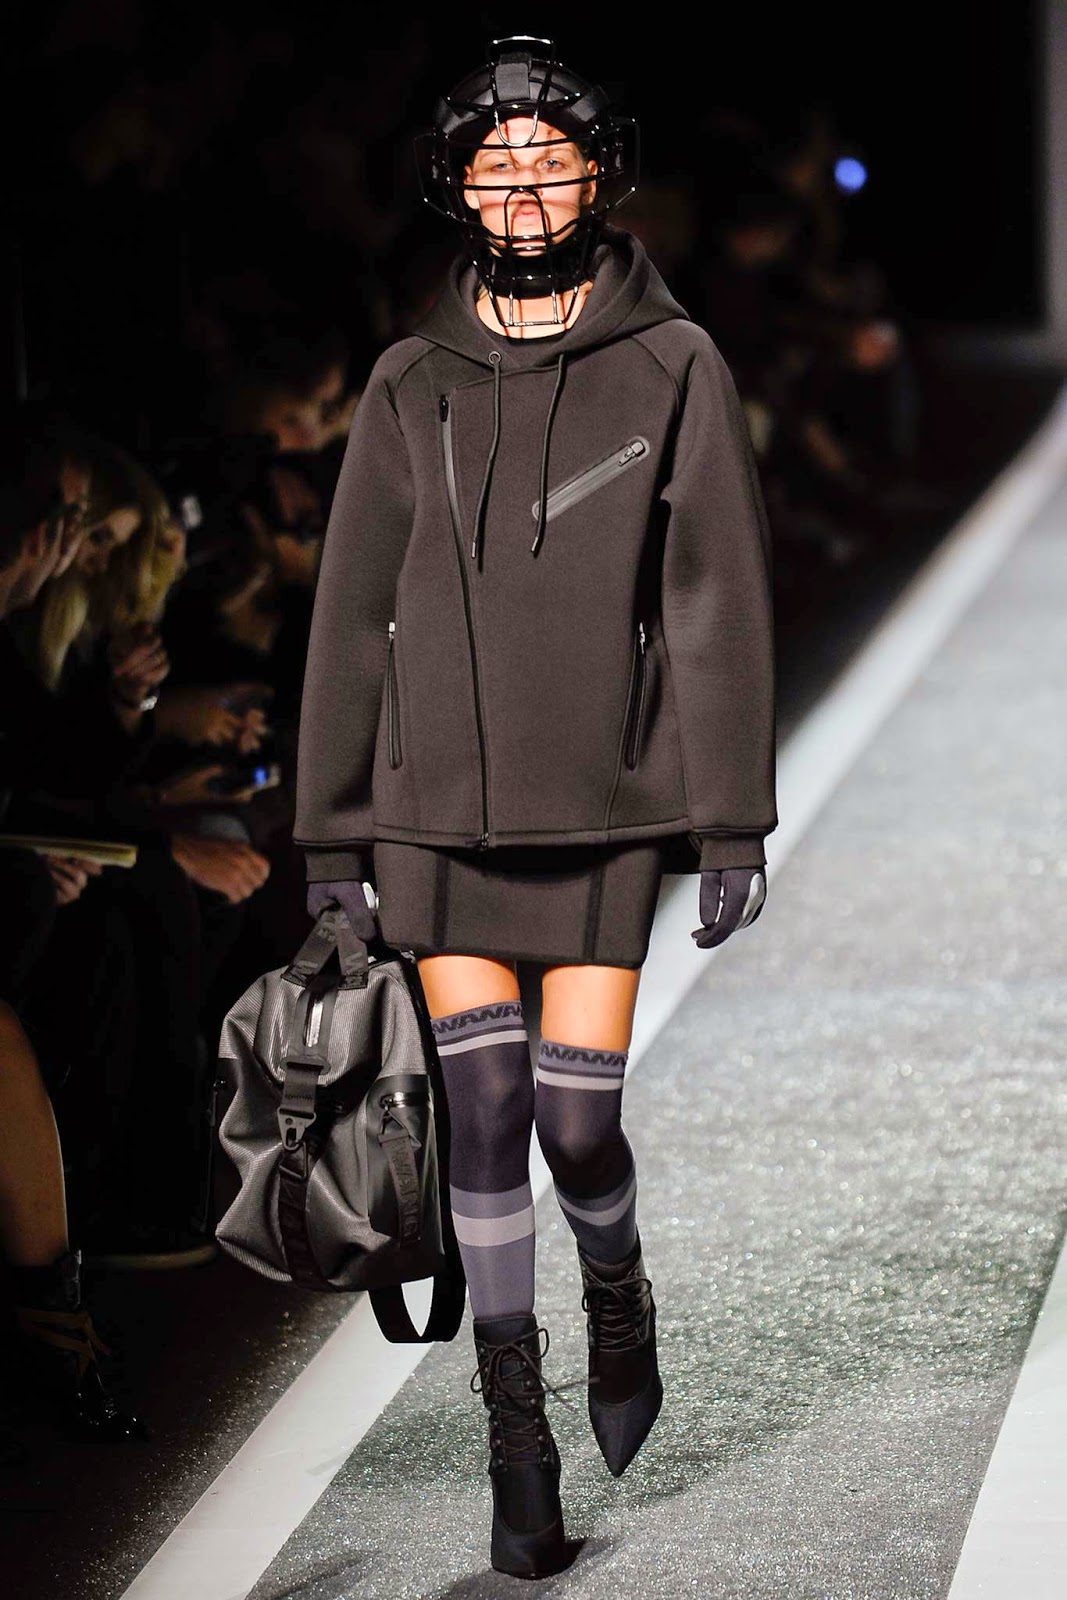 Nicola Loves. . . : The Collections: Alexander Wang x H&M